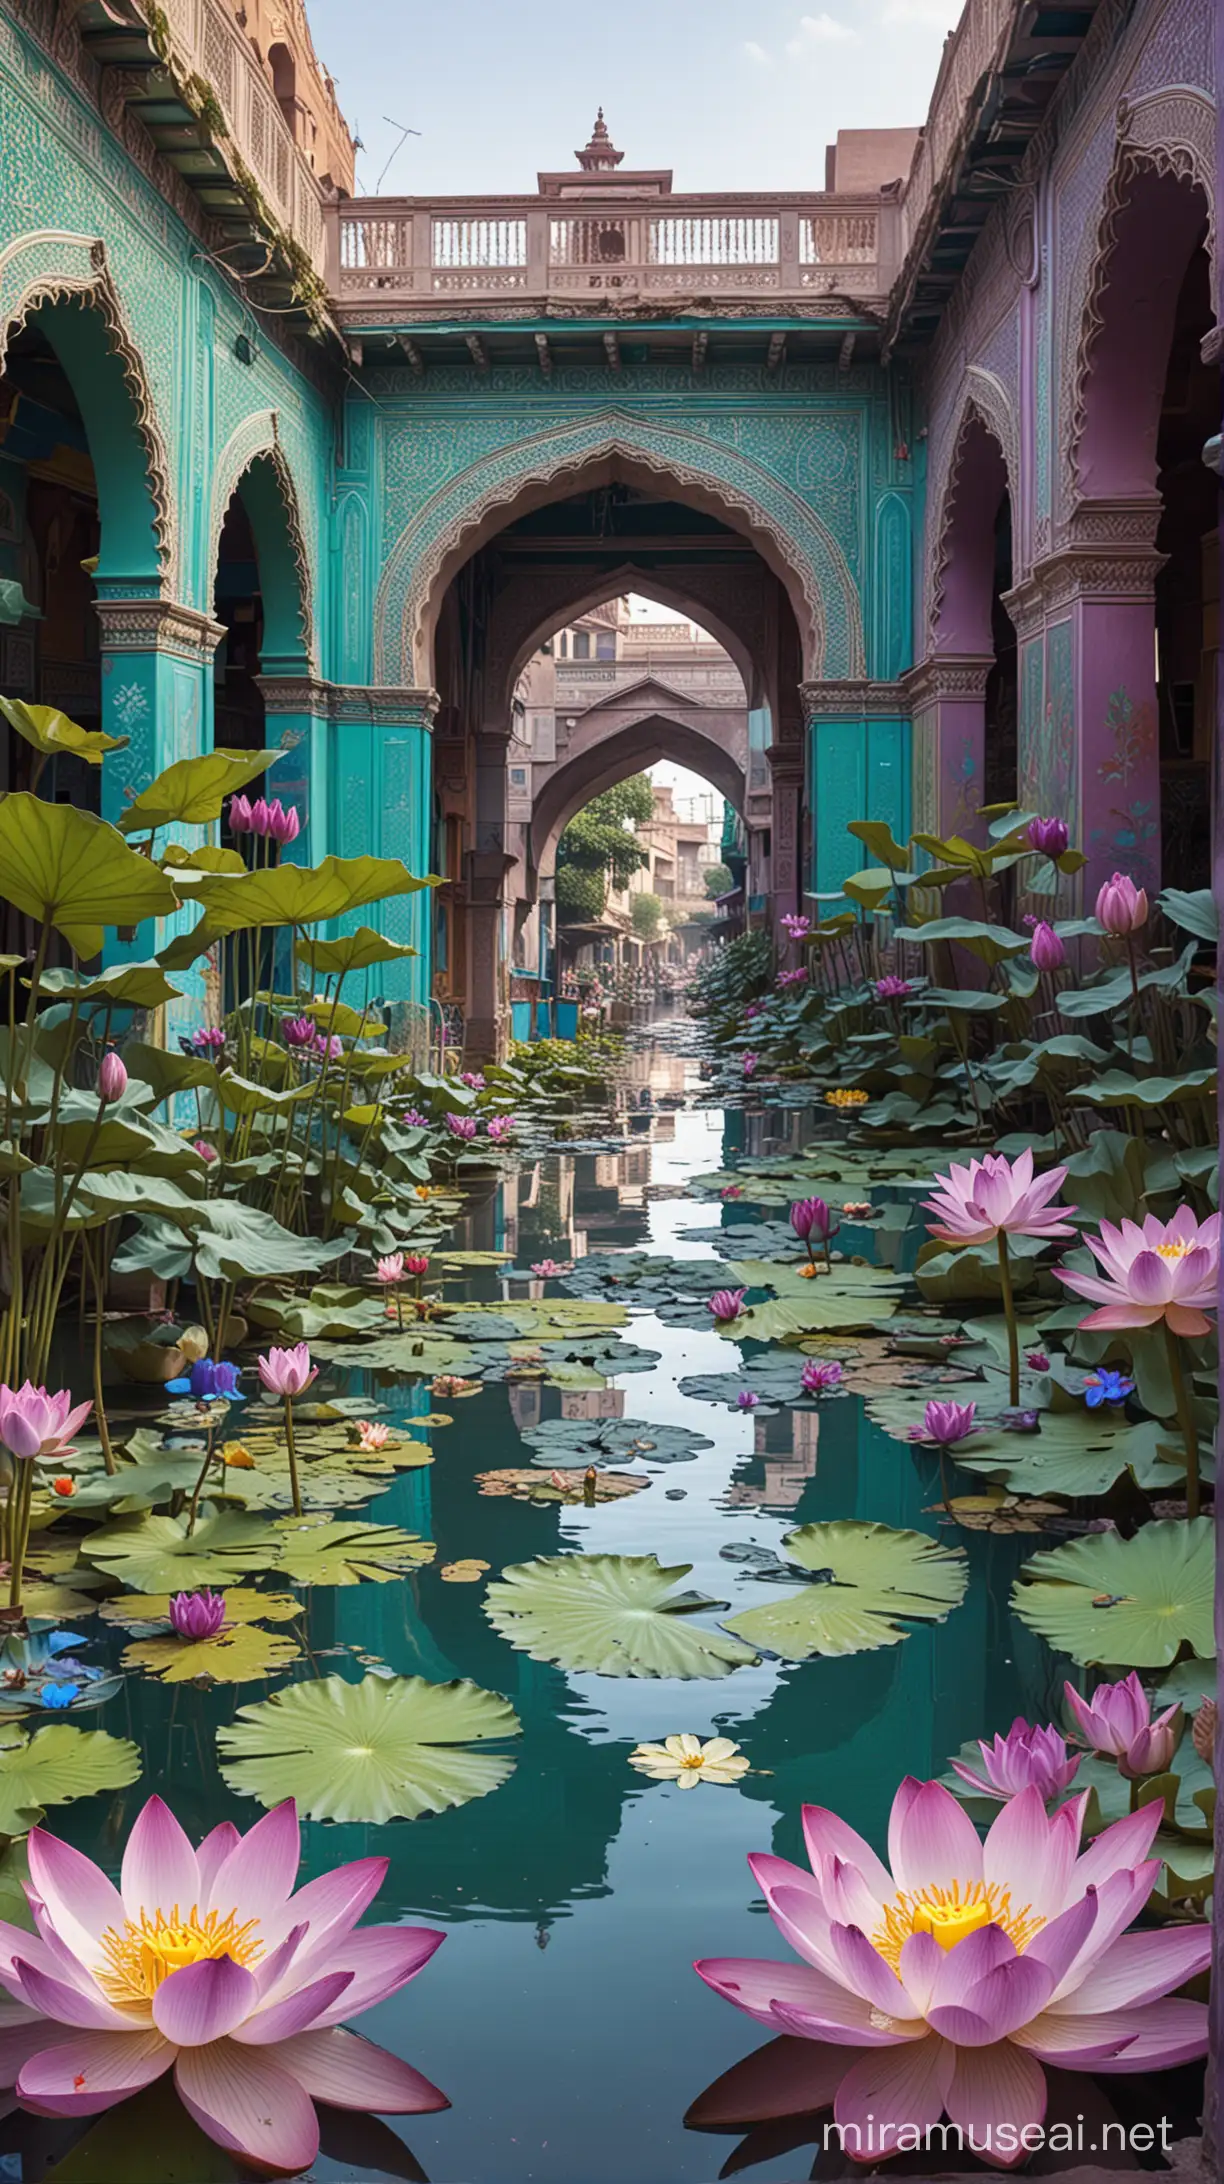 futuristic scenery, psy-electronic,colorfully abundant, lotus and african pattern, several layers, all colours, turquoise, purple, green, white, yellow, hip hop style, benares court and river ghats, mughal scenario and arches, water lilies, colorful, psychedelic, hyperrealistic, pastel colors on walls wearing off, background blurred